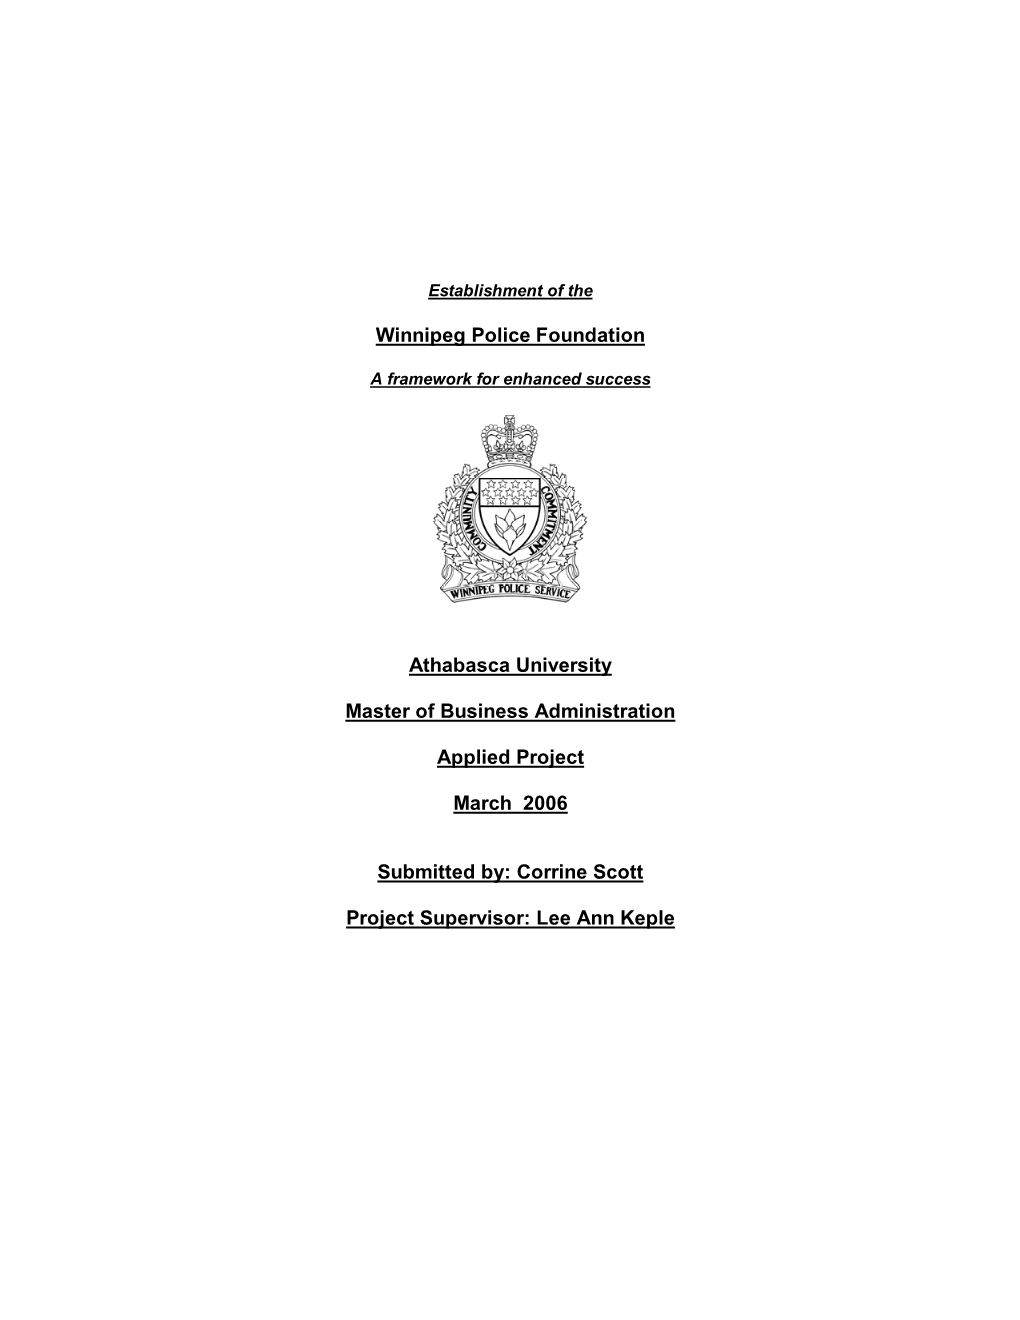 Establishment of the Winnipeg Police Foundation Will Undoubtedly Be a Worthwhile and Successful Endeavour